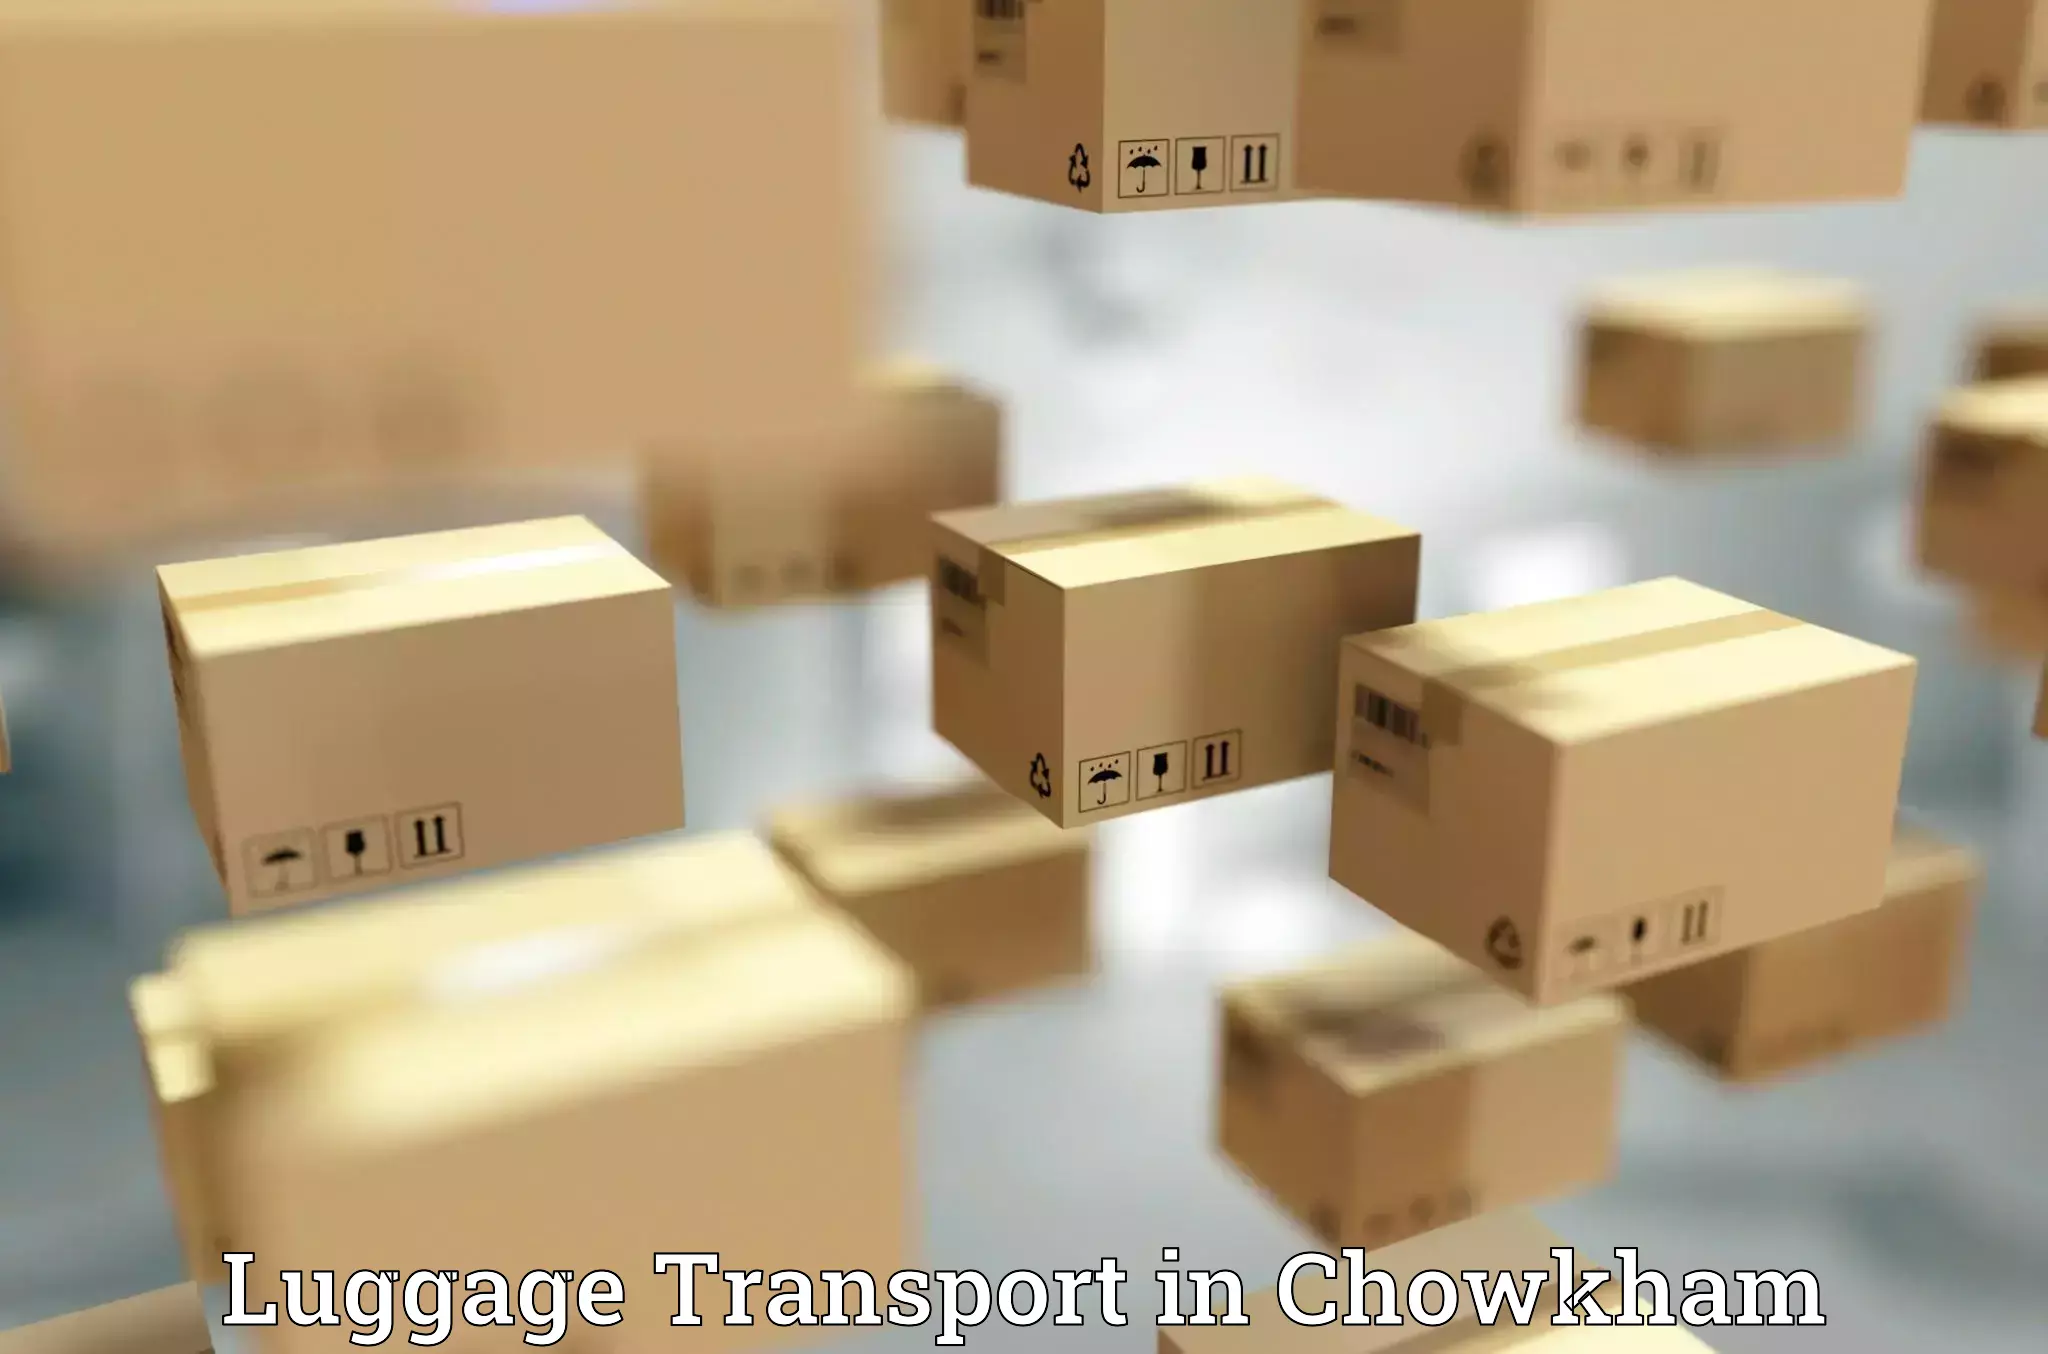 Luggage transport solutions in Chowkham